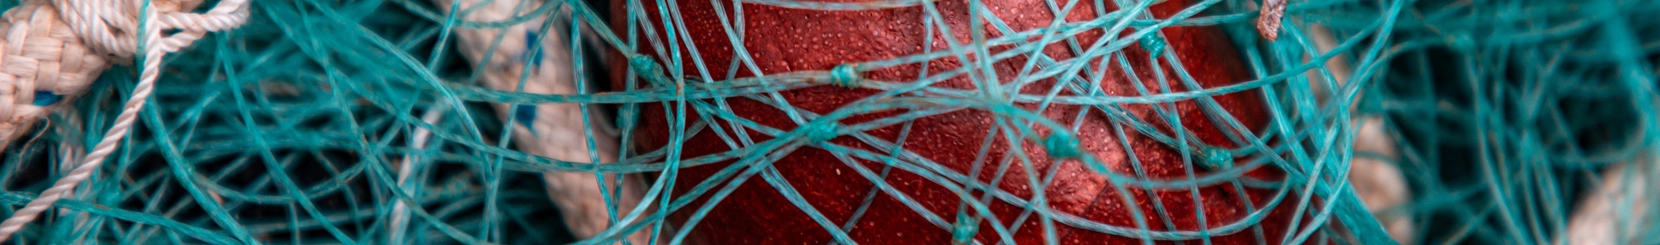 A photograph red buoy wrapped in teal fishing net.